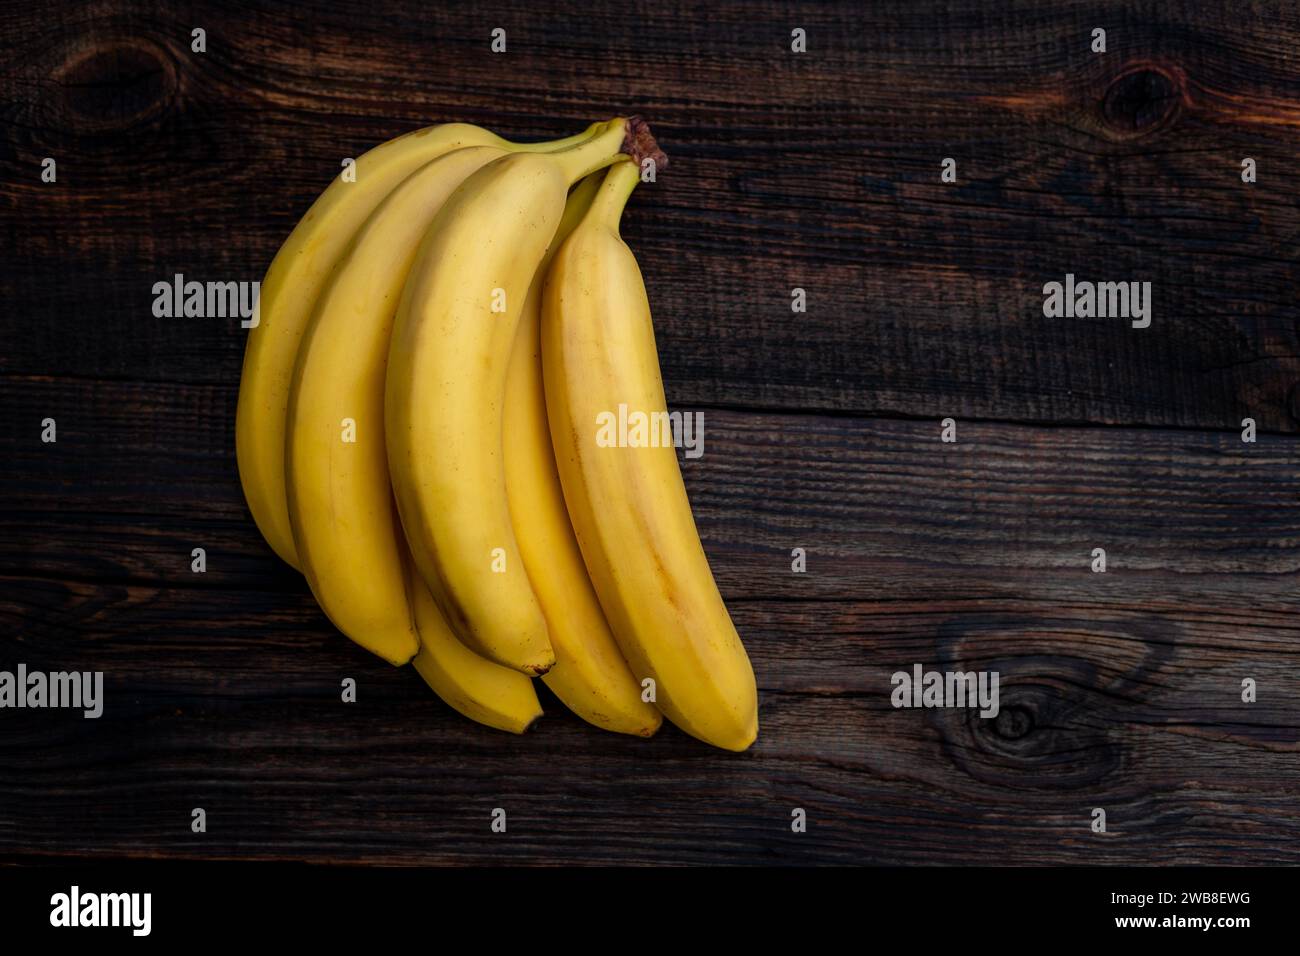 Some bananas on a white wooden table. Empty copy space for editor's text. Stock Photo